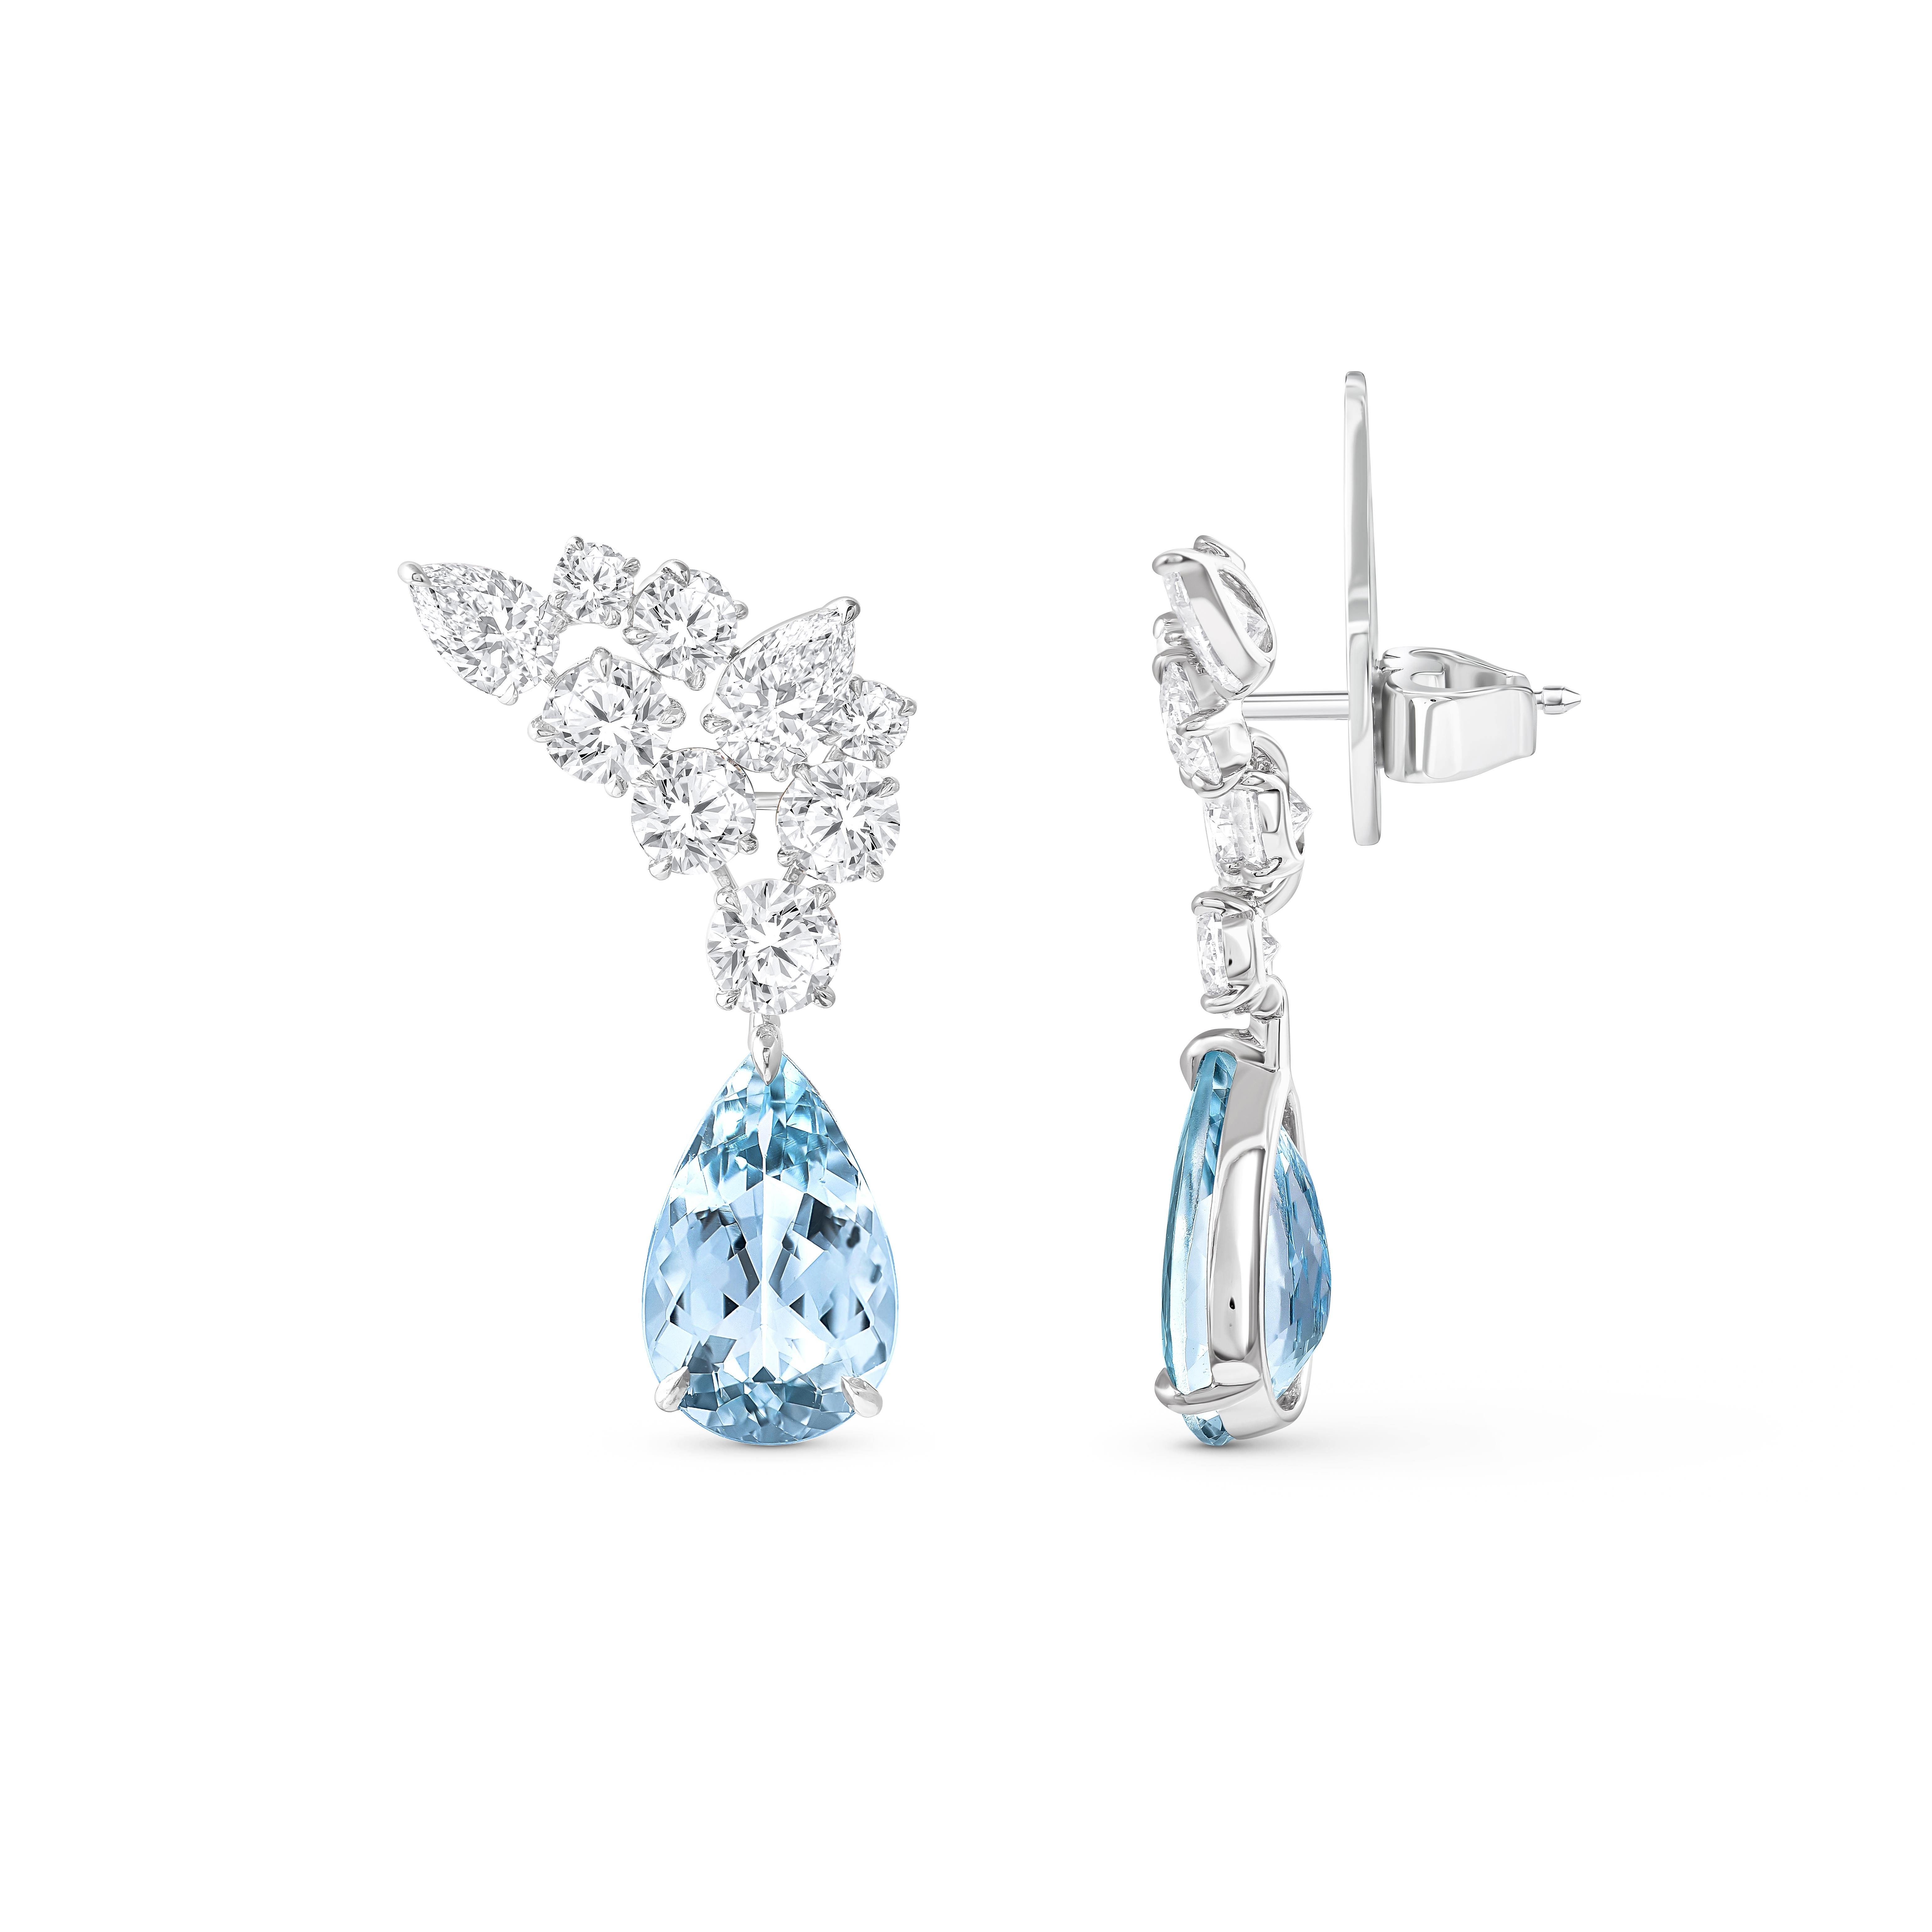 Inspired by the JOY of experiencing a gushing waterfall, these stunning earrings from the Cascade Collection features 4 pear-cut diamond, 14 round cut colorless diamonds and 2 pear aquamarine. These dressy earrings are perfect for the festive